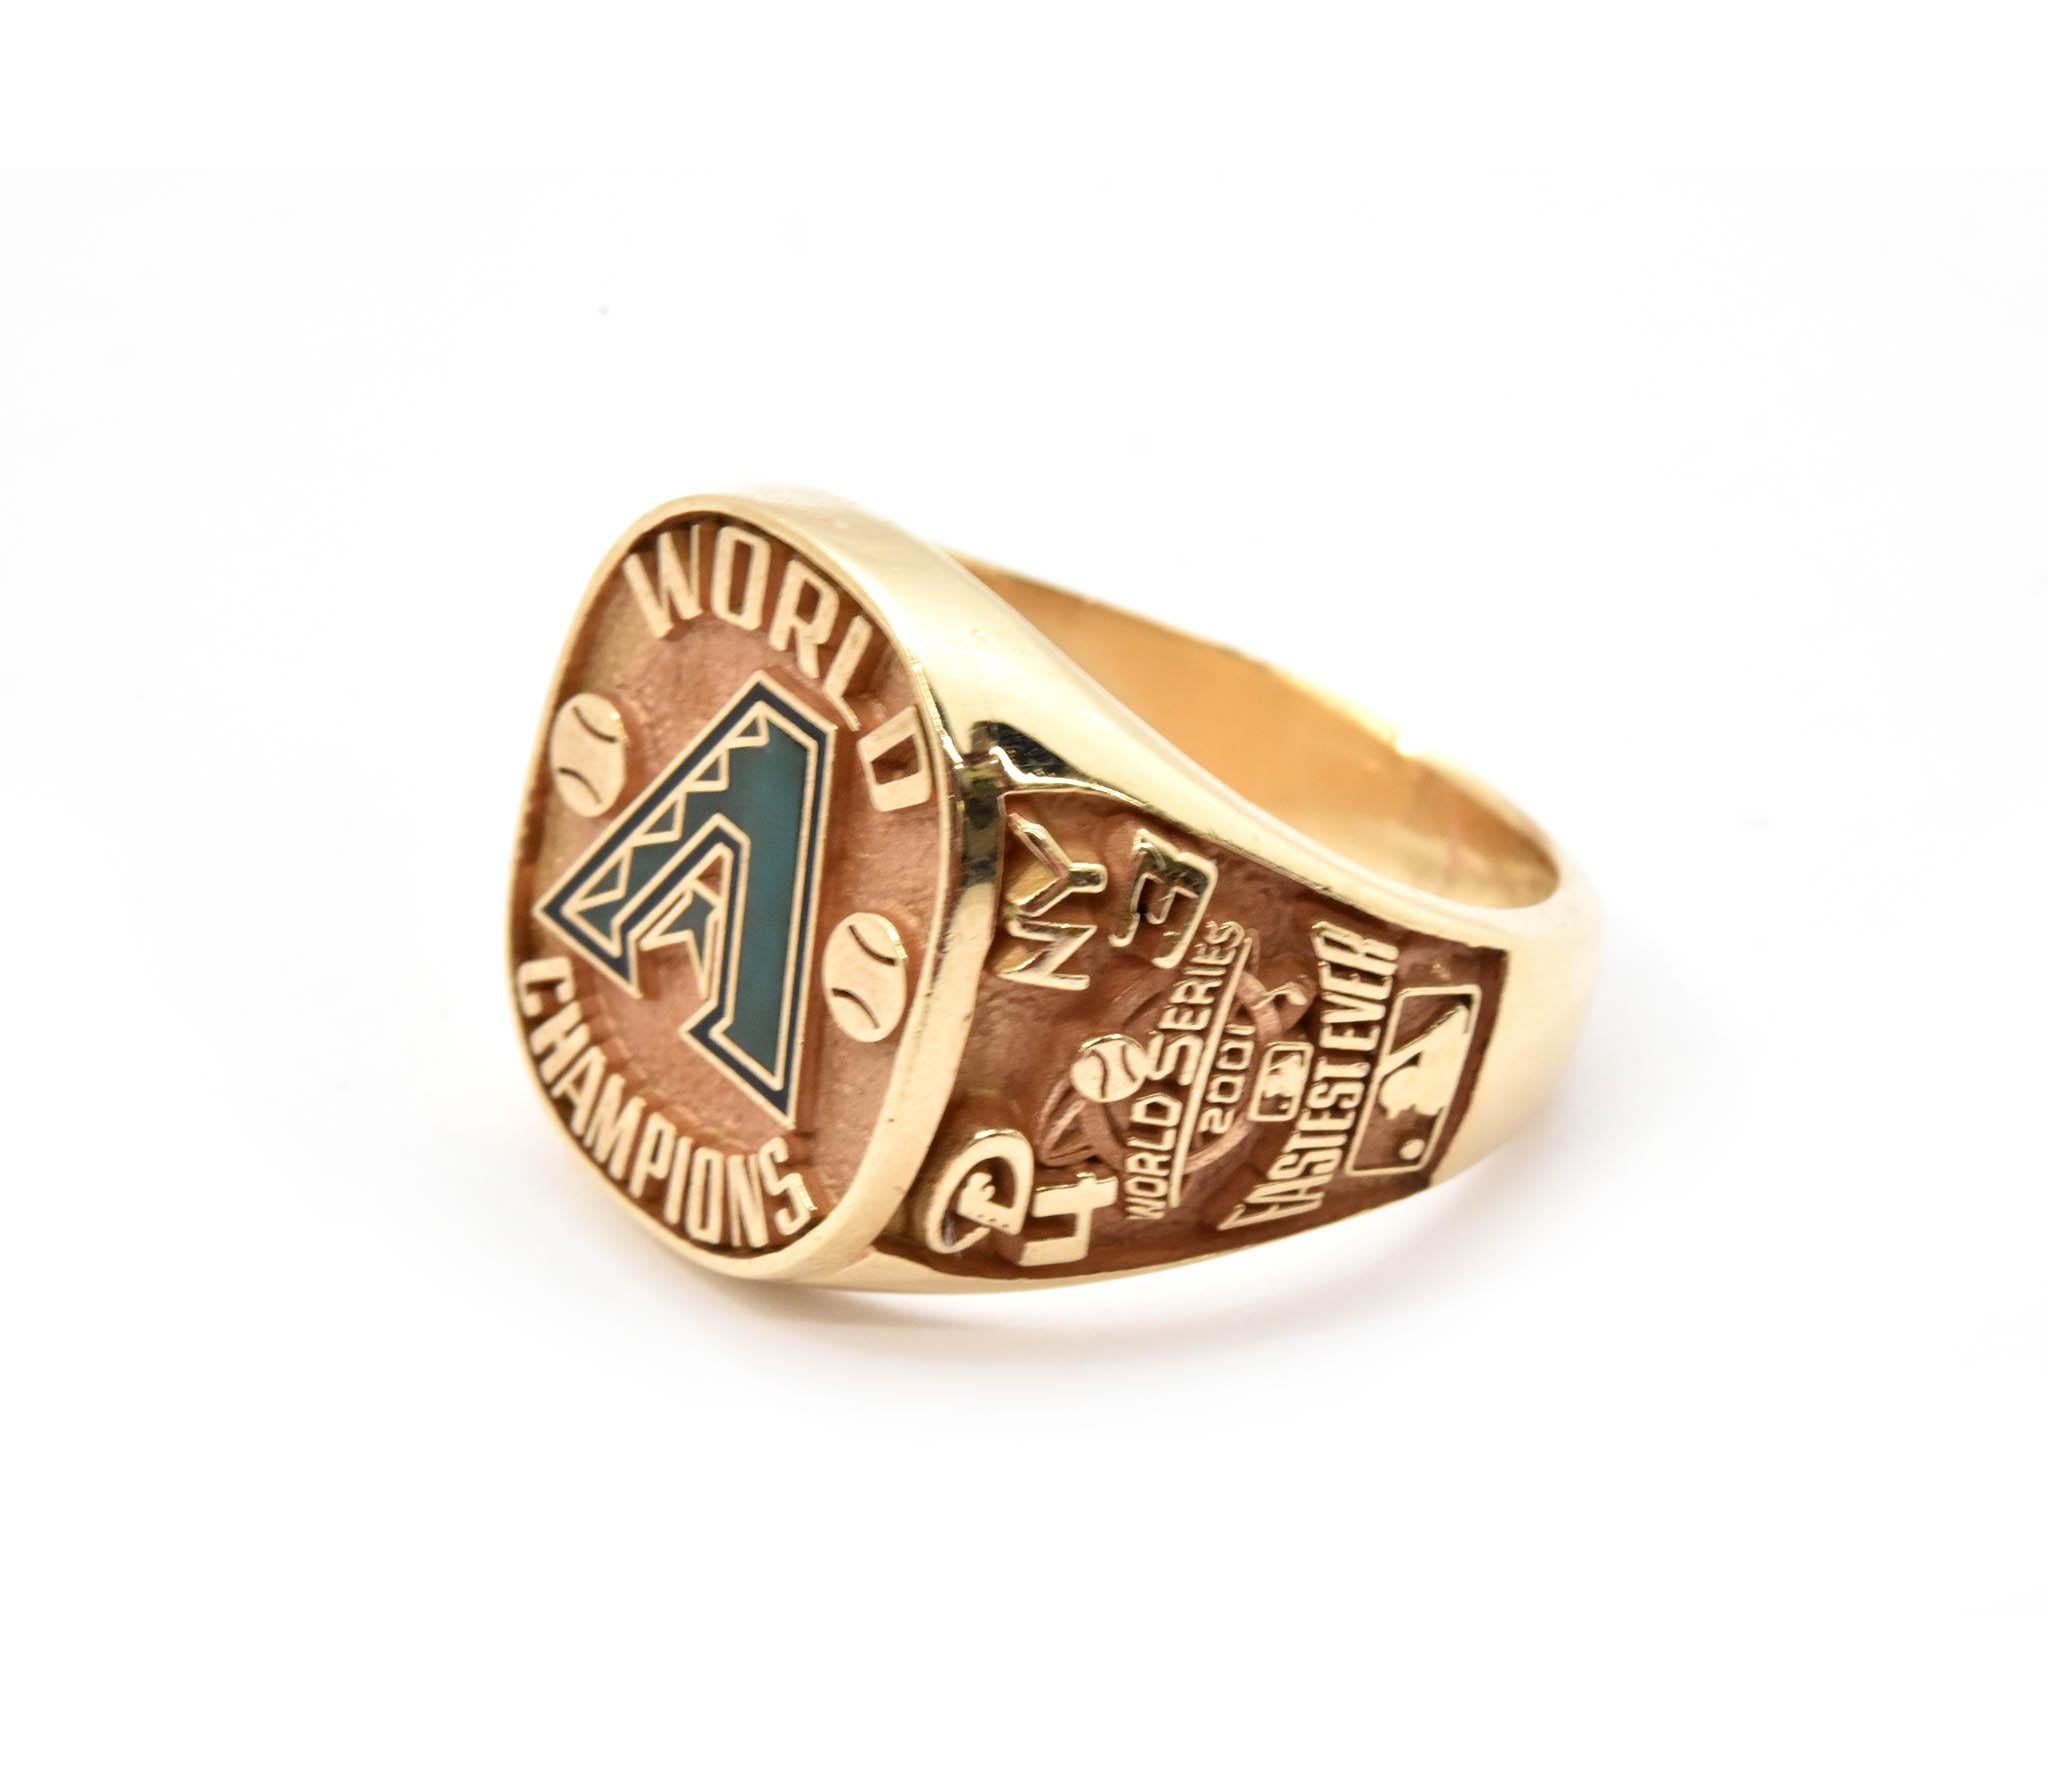 This is an authentic Arizona Diamondbacks 2001 World Series Championship ring for part team owner “Jorishie” made in 14k yellow gold. Detailed on one side of this award ring is “Fastest Ever” and the MLB logo along with the score of the